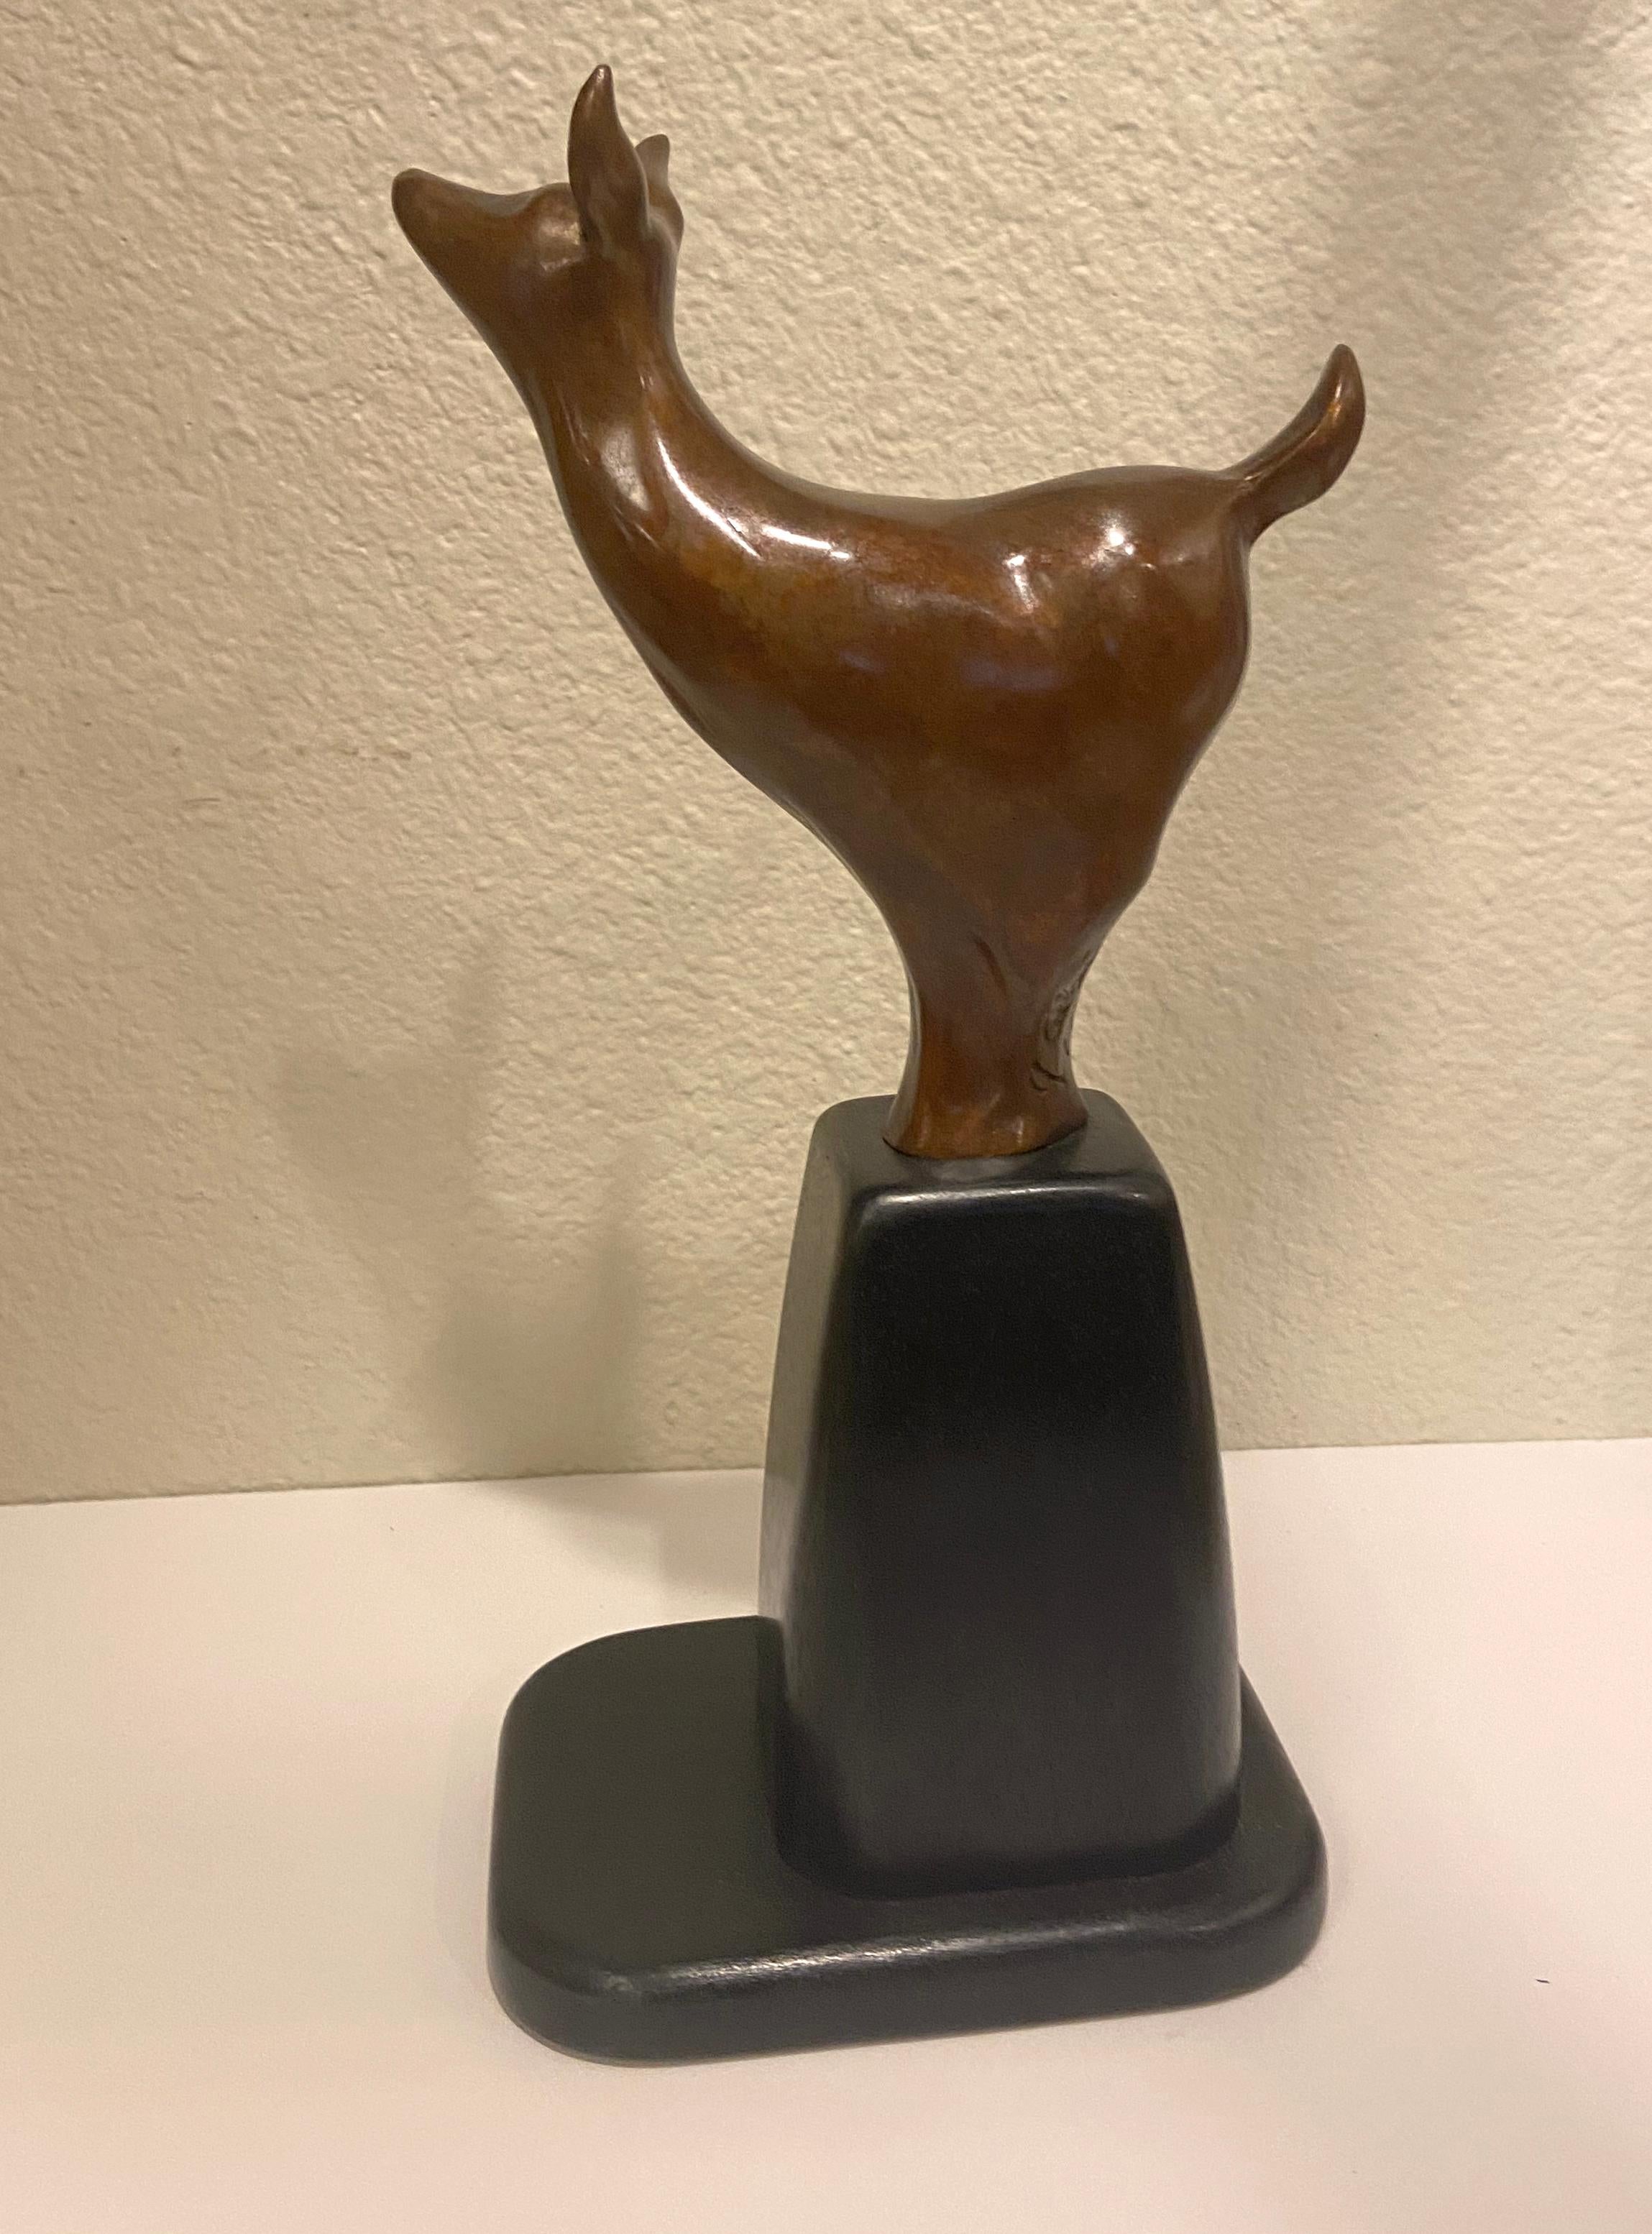 Serenity by Gary Alsum
Abstract Bronze Deer, limited edition of 50, number 1 available.
9.5x4.5x3.5